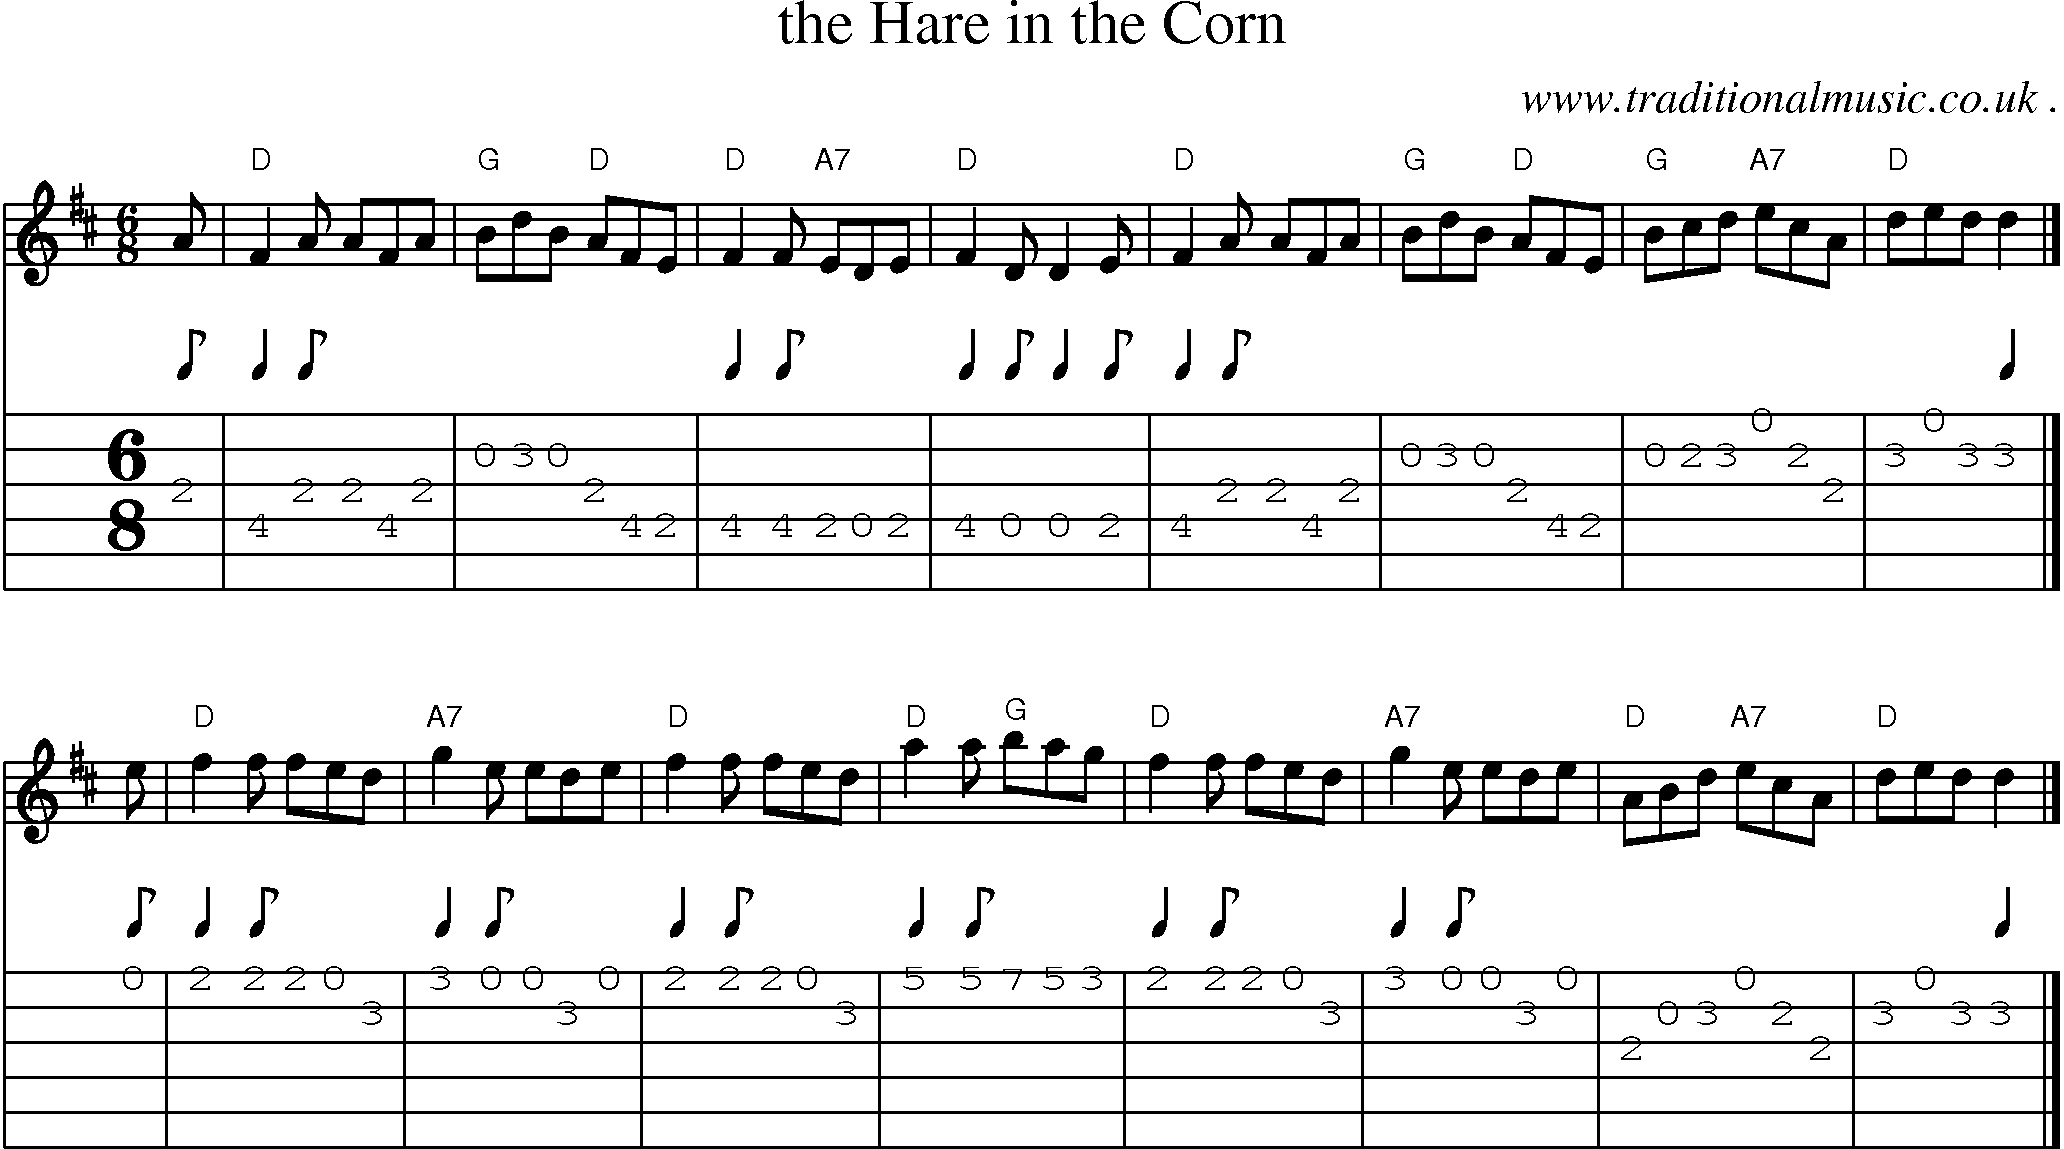 Sheet-music  score, Chords and Guitar Tabs for The Hare In The Corn